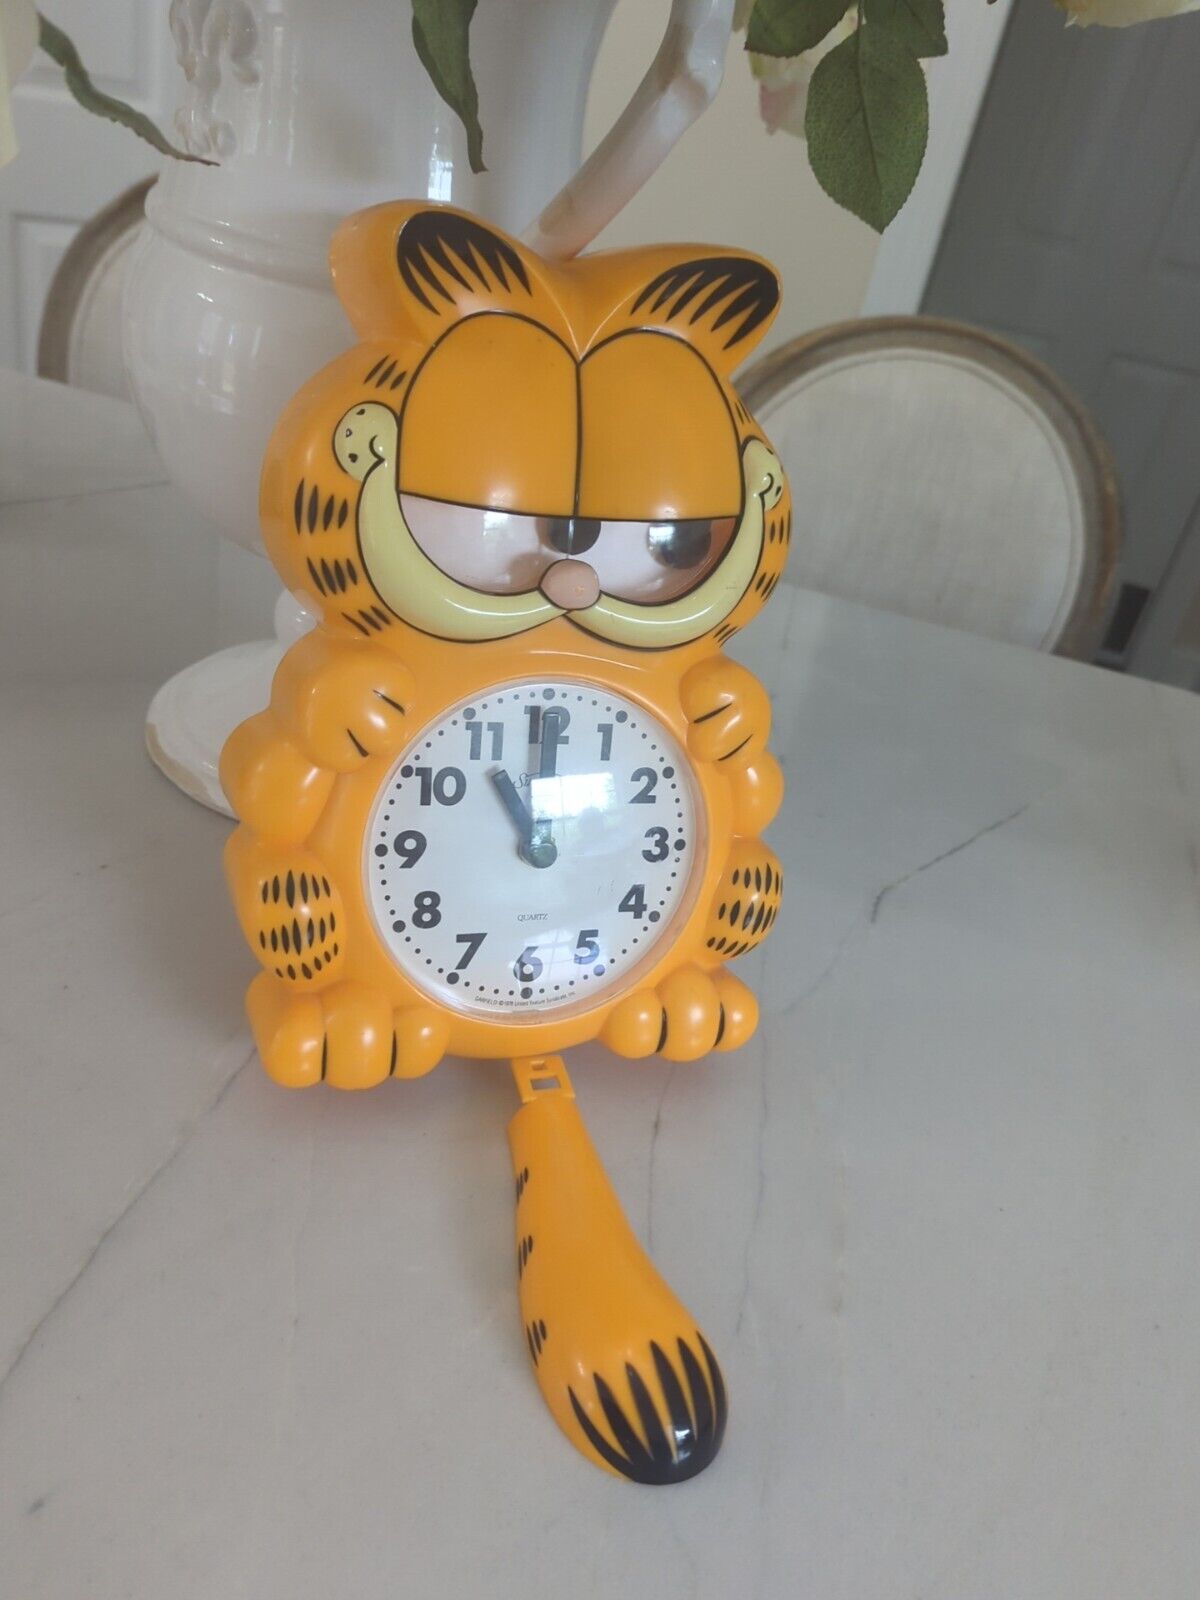 RARE VINTAGE 1978 GARFIELD SUNBEAM HANGING WALL CLOCK . For Parts Only. Not Work